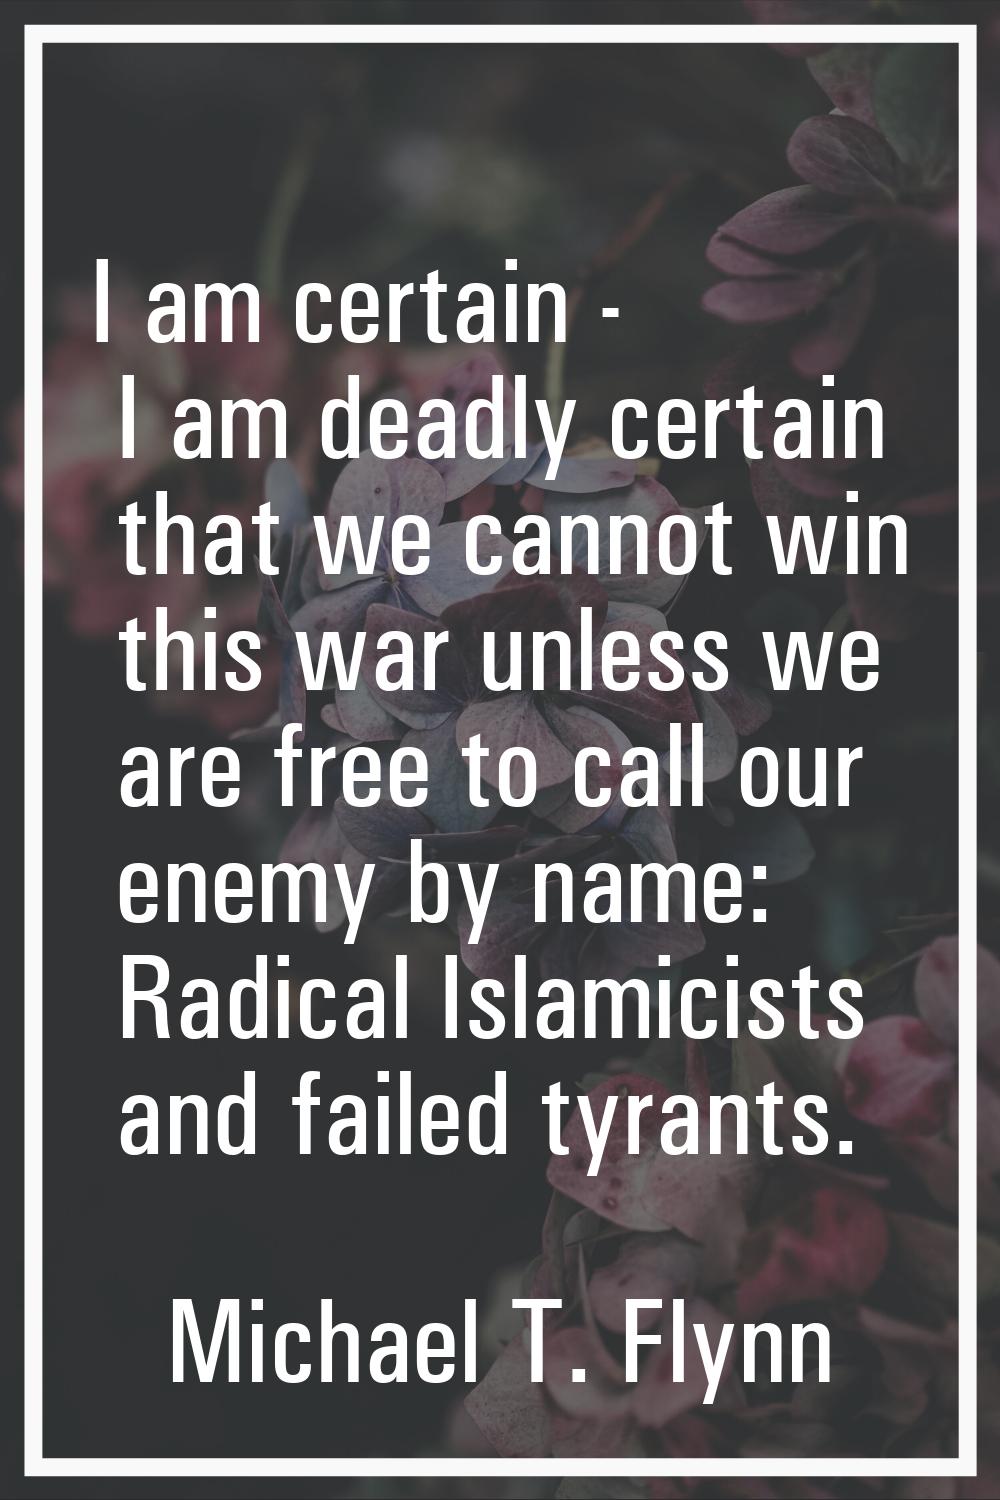 I am certain - I am deadly certain that we cannot win this war unless we are free to call our enemy